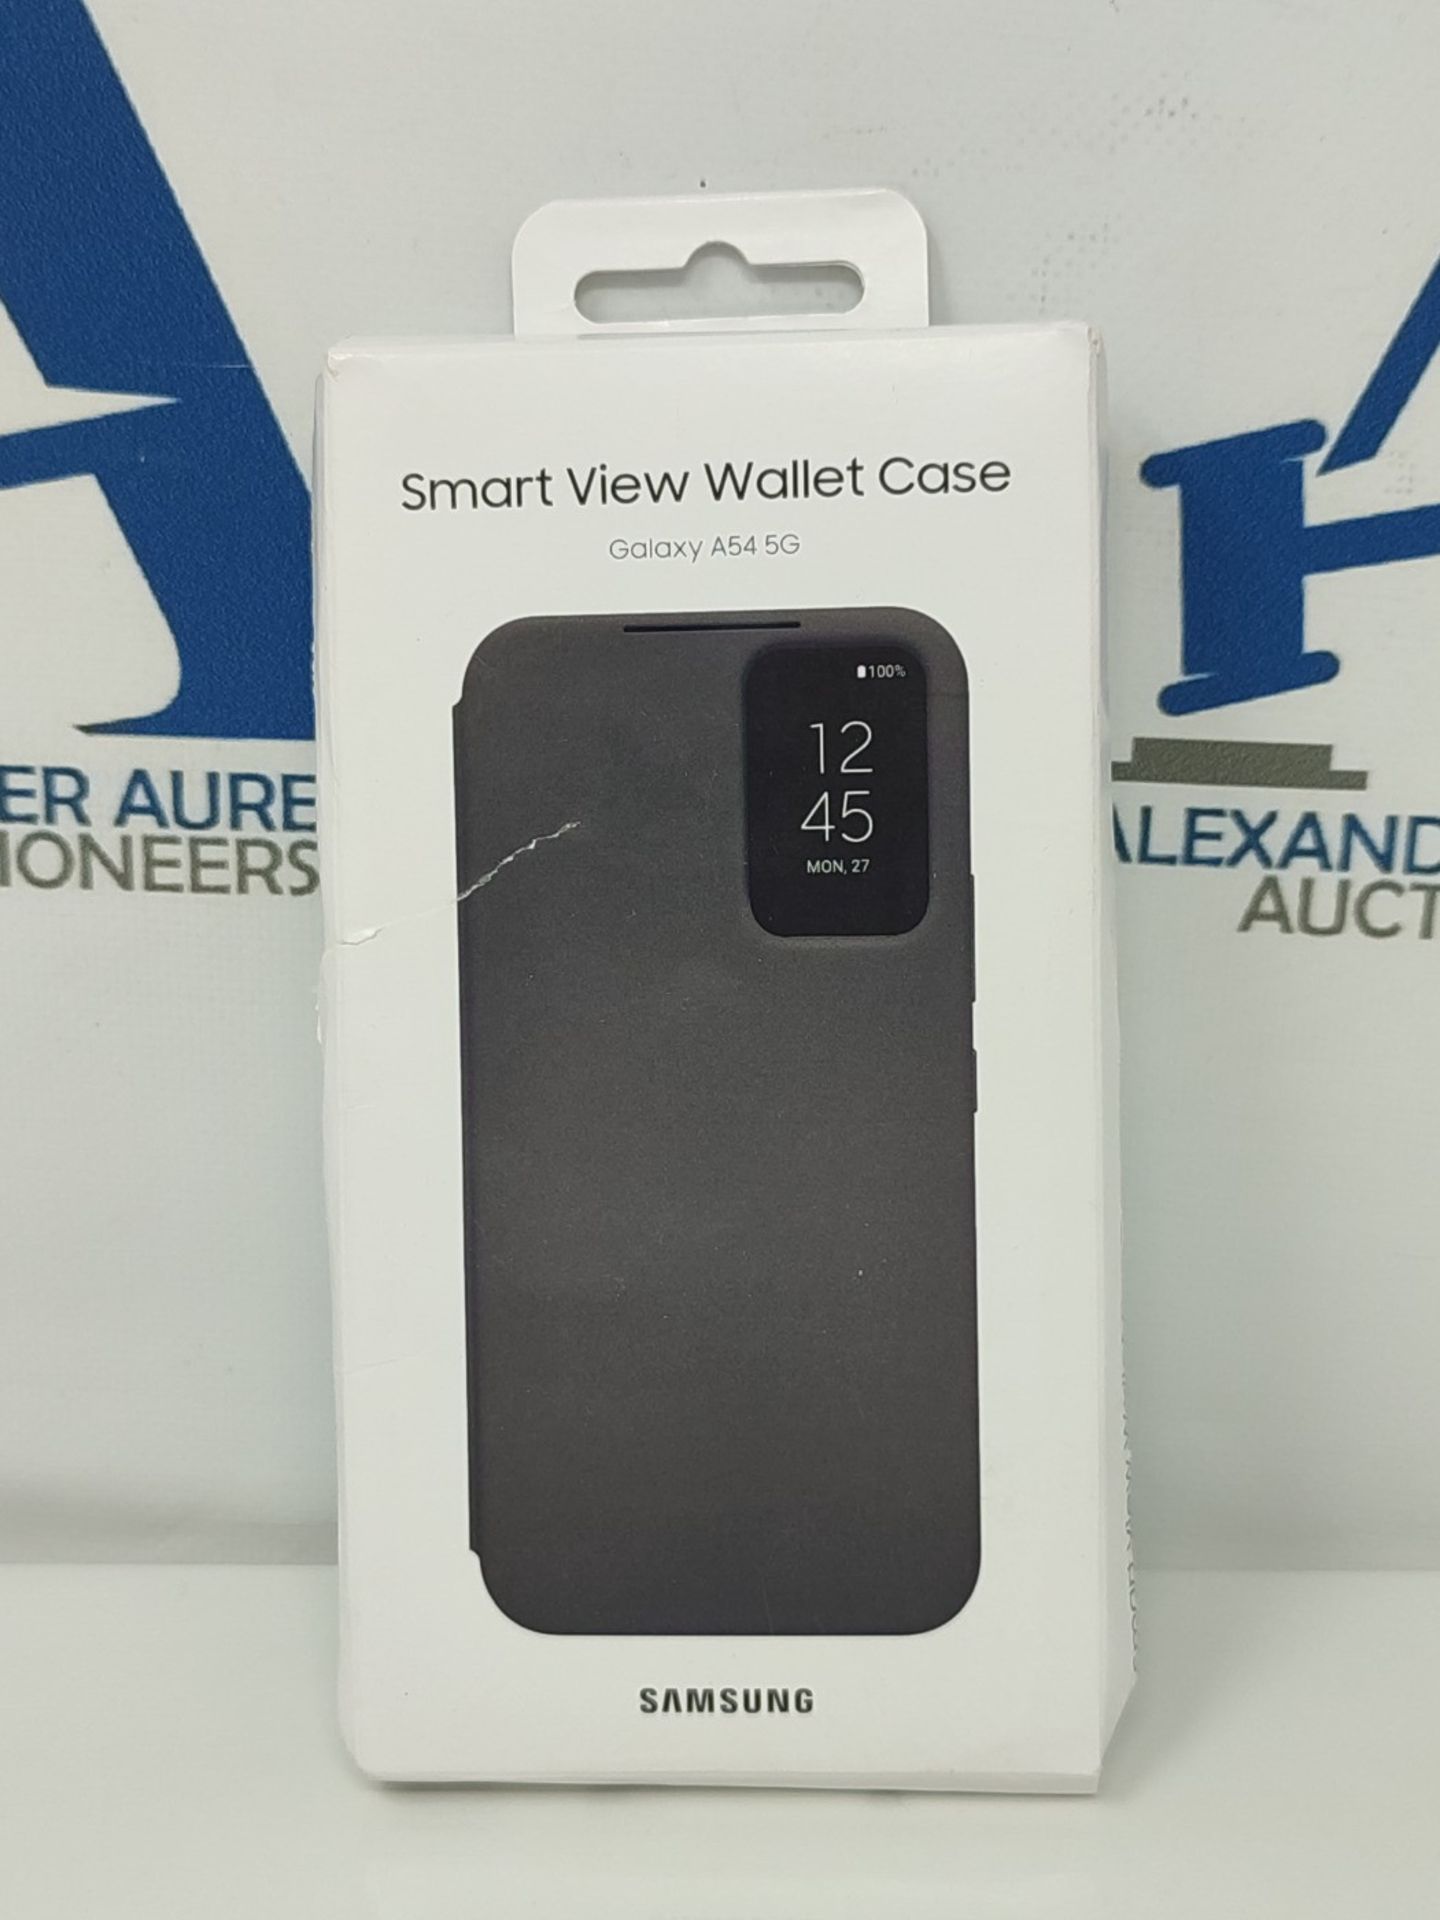 Samsung Official Smart View Wallet Case for A54 - Image 2 of 3